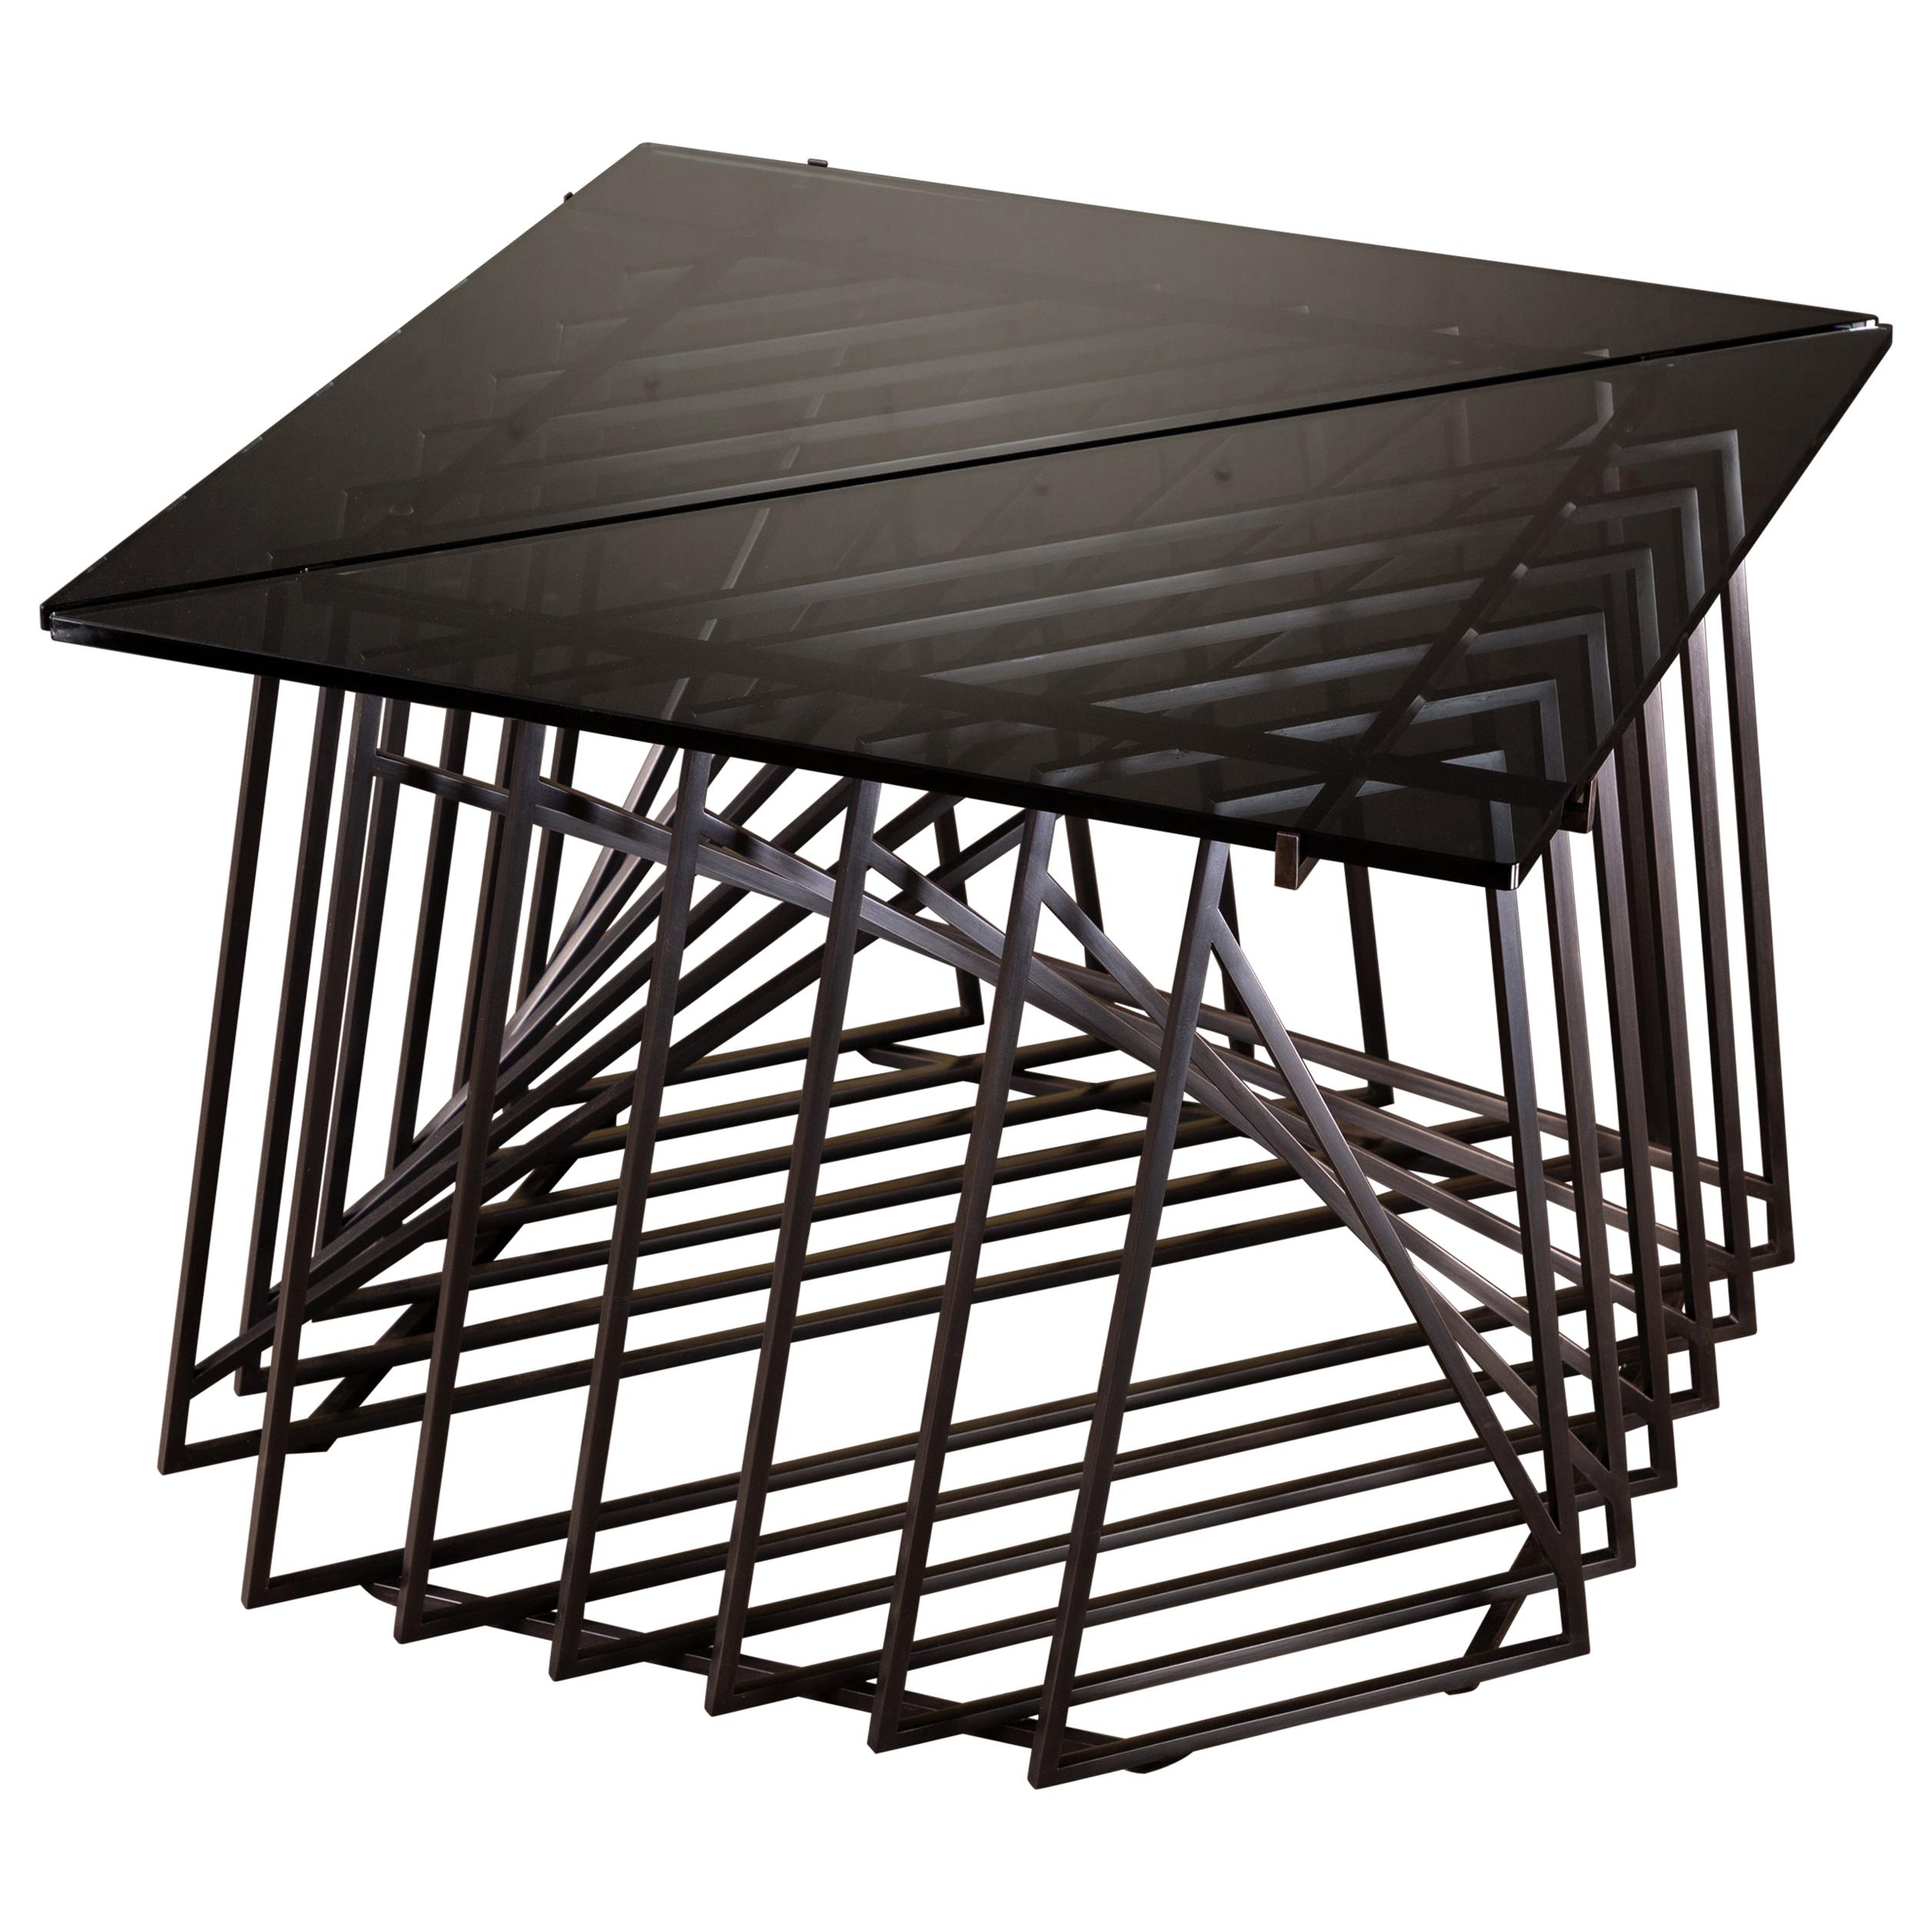 The Nexus Side Tables are a sculptural study, finely constructed and finished with satin black oxide steel and smoked gray glass. Versatile and modular, the triangular tables can be fully customized to be used independently, as a square duo, an